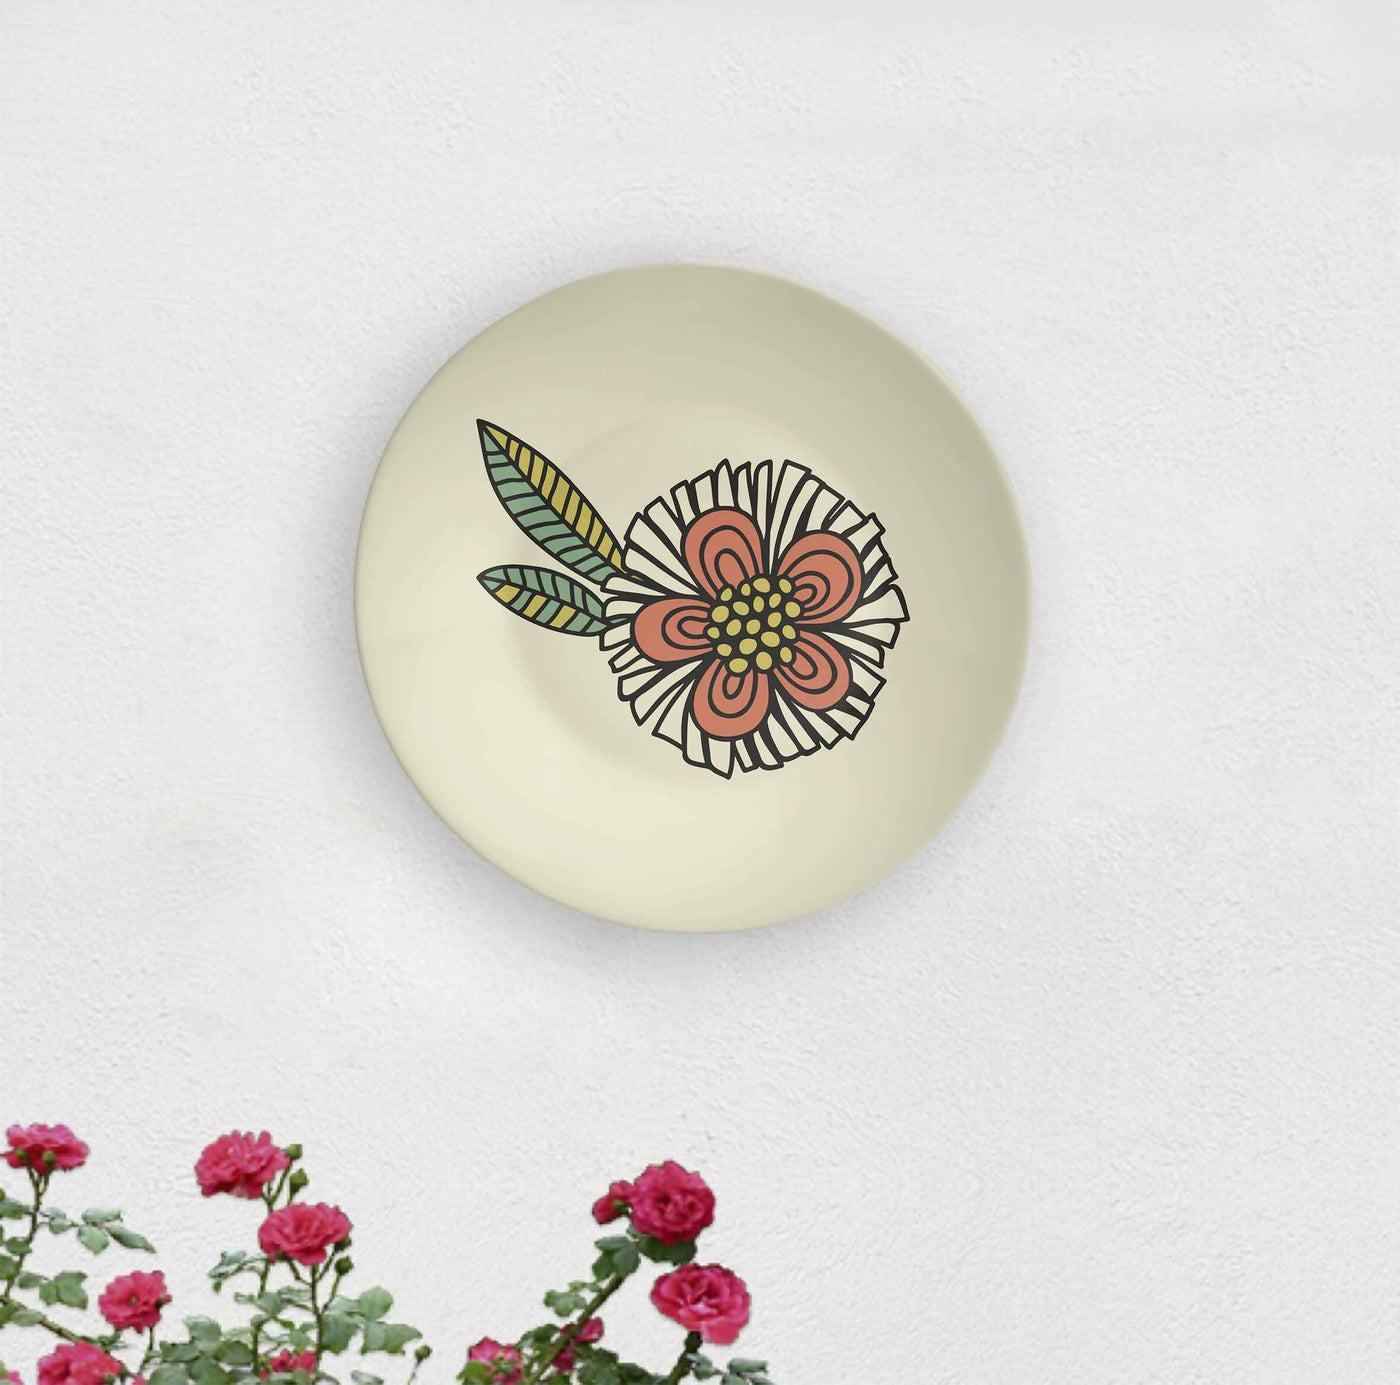 Vintage American Spiral Flower Decorative Wall Plate - Wall Decor - 1